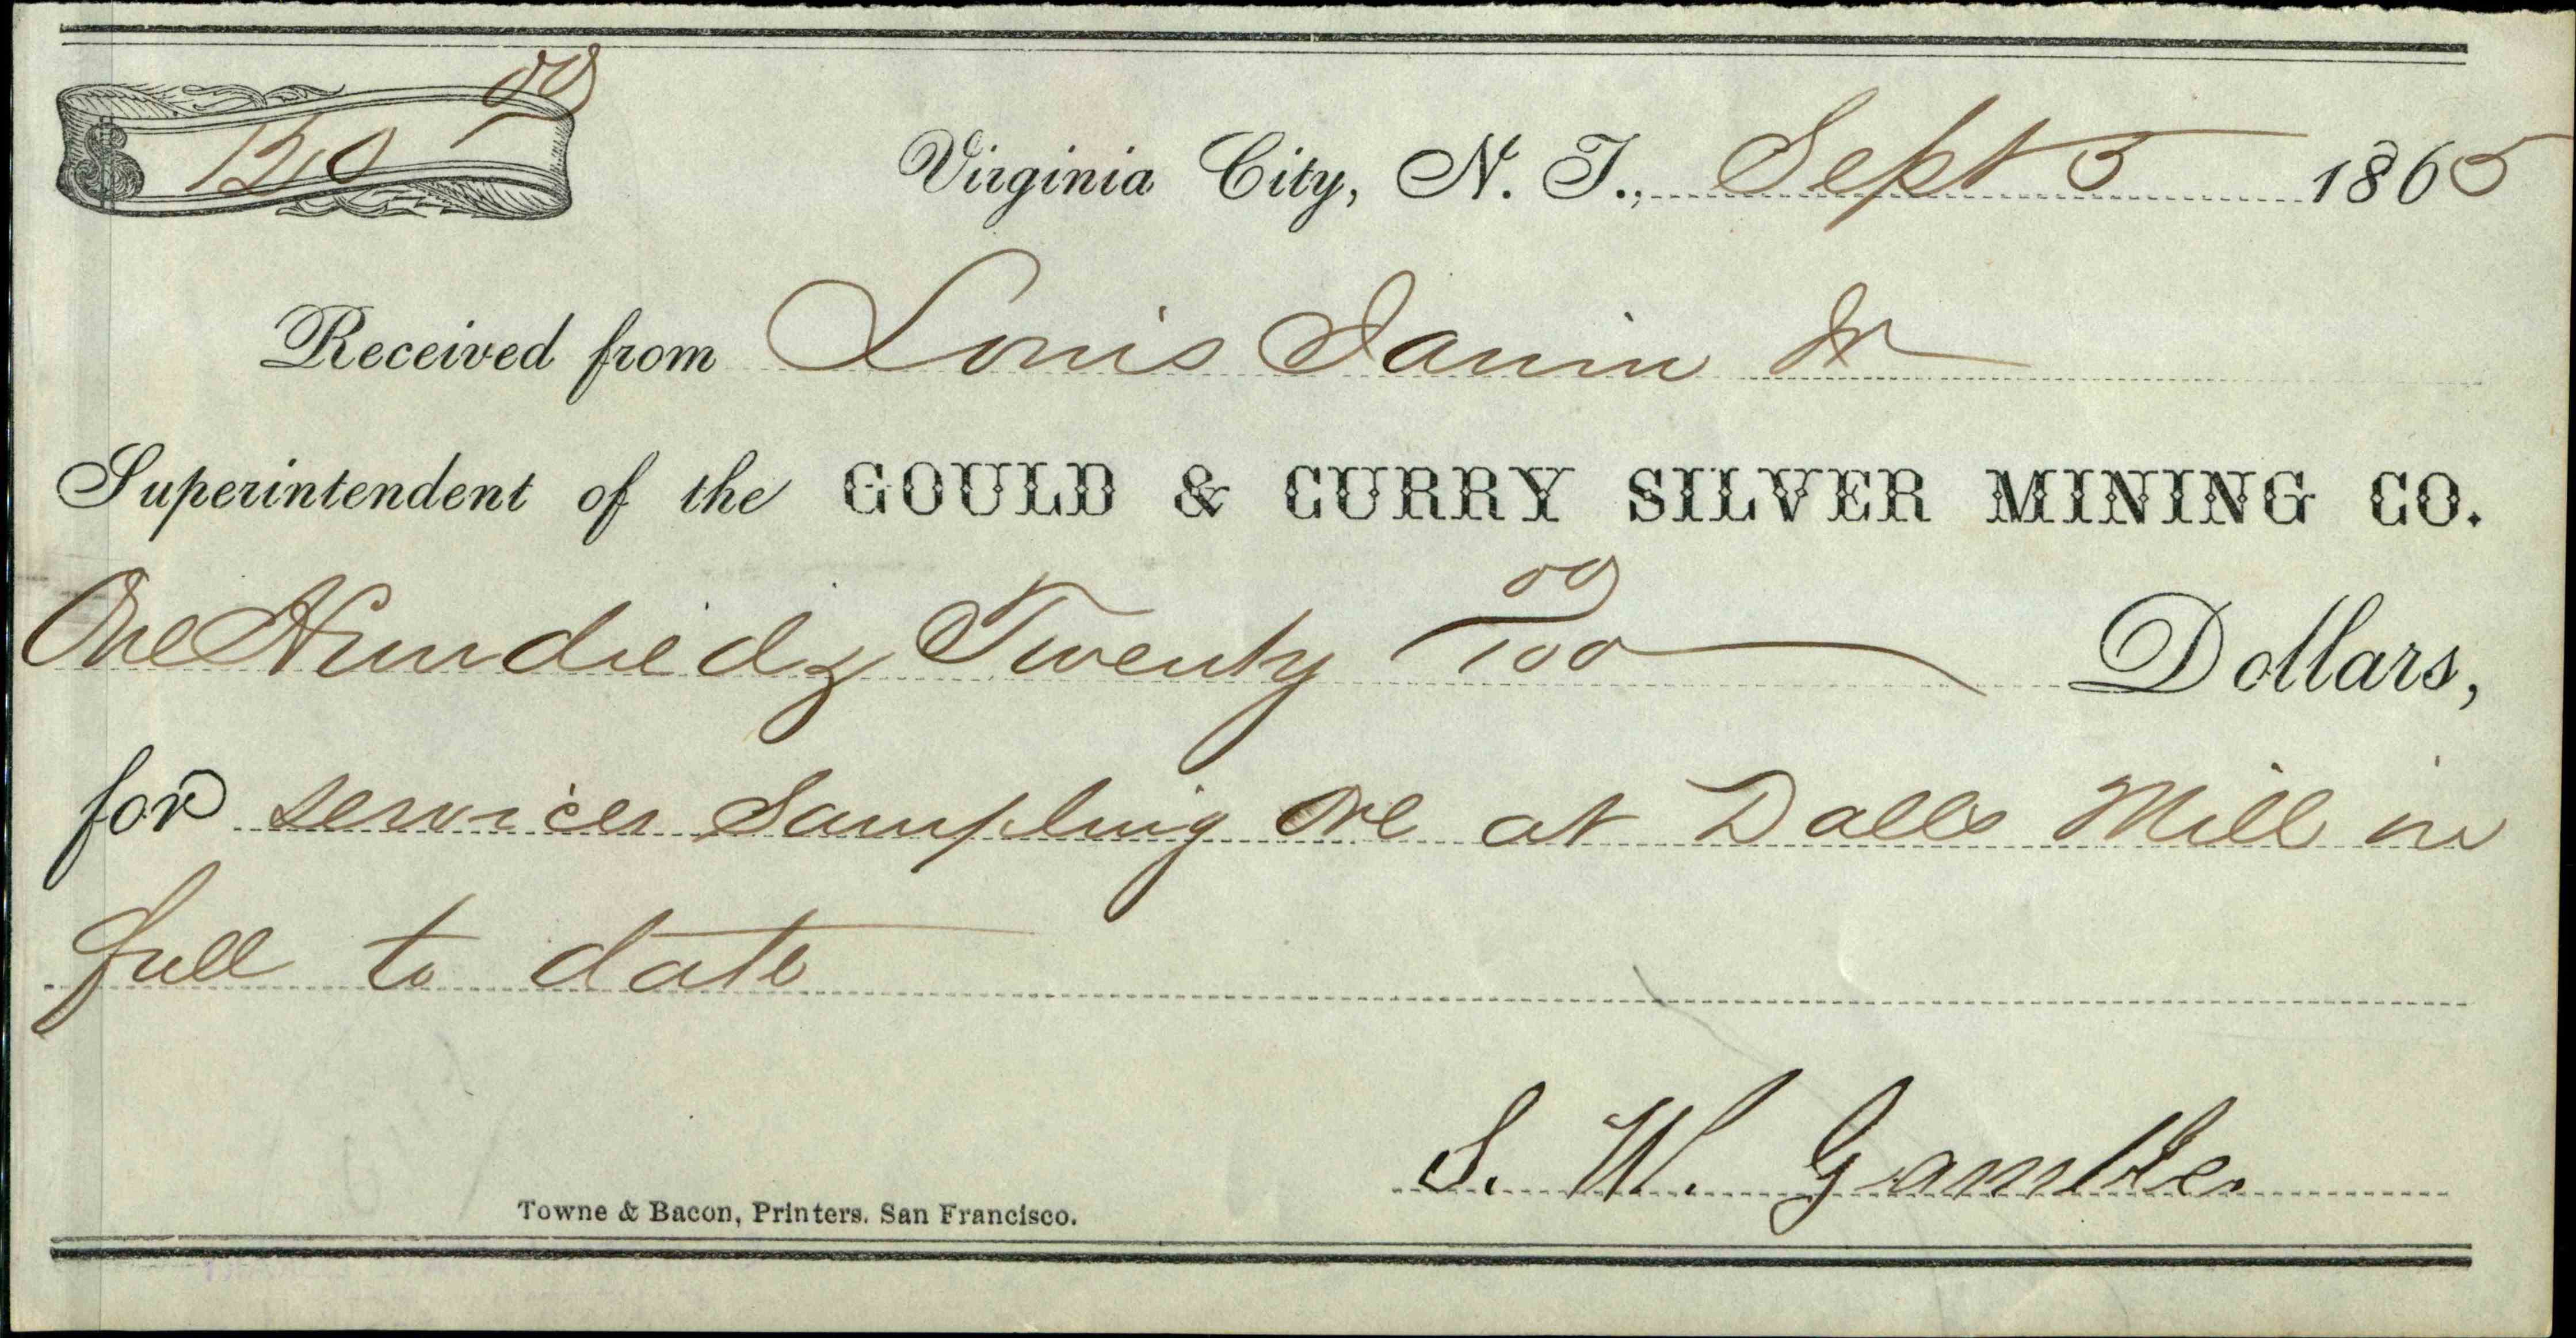 Receipt for Gould & Curry Silver Mining Co.